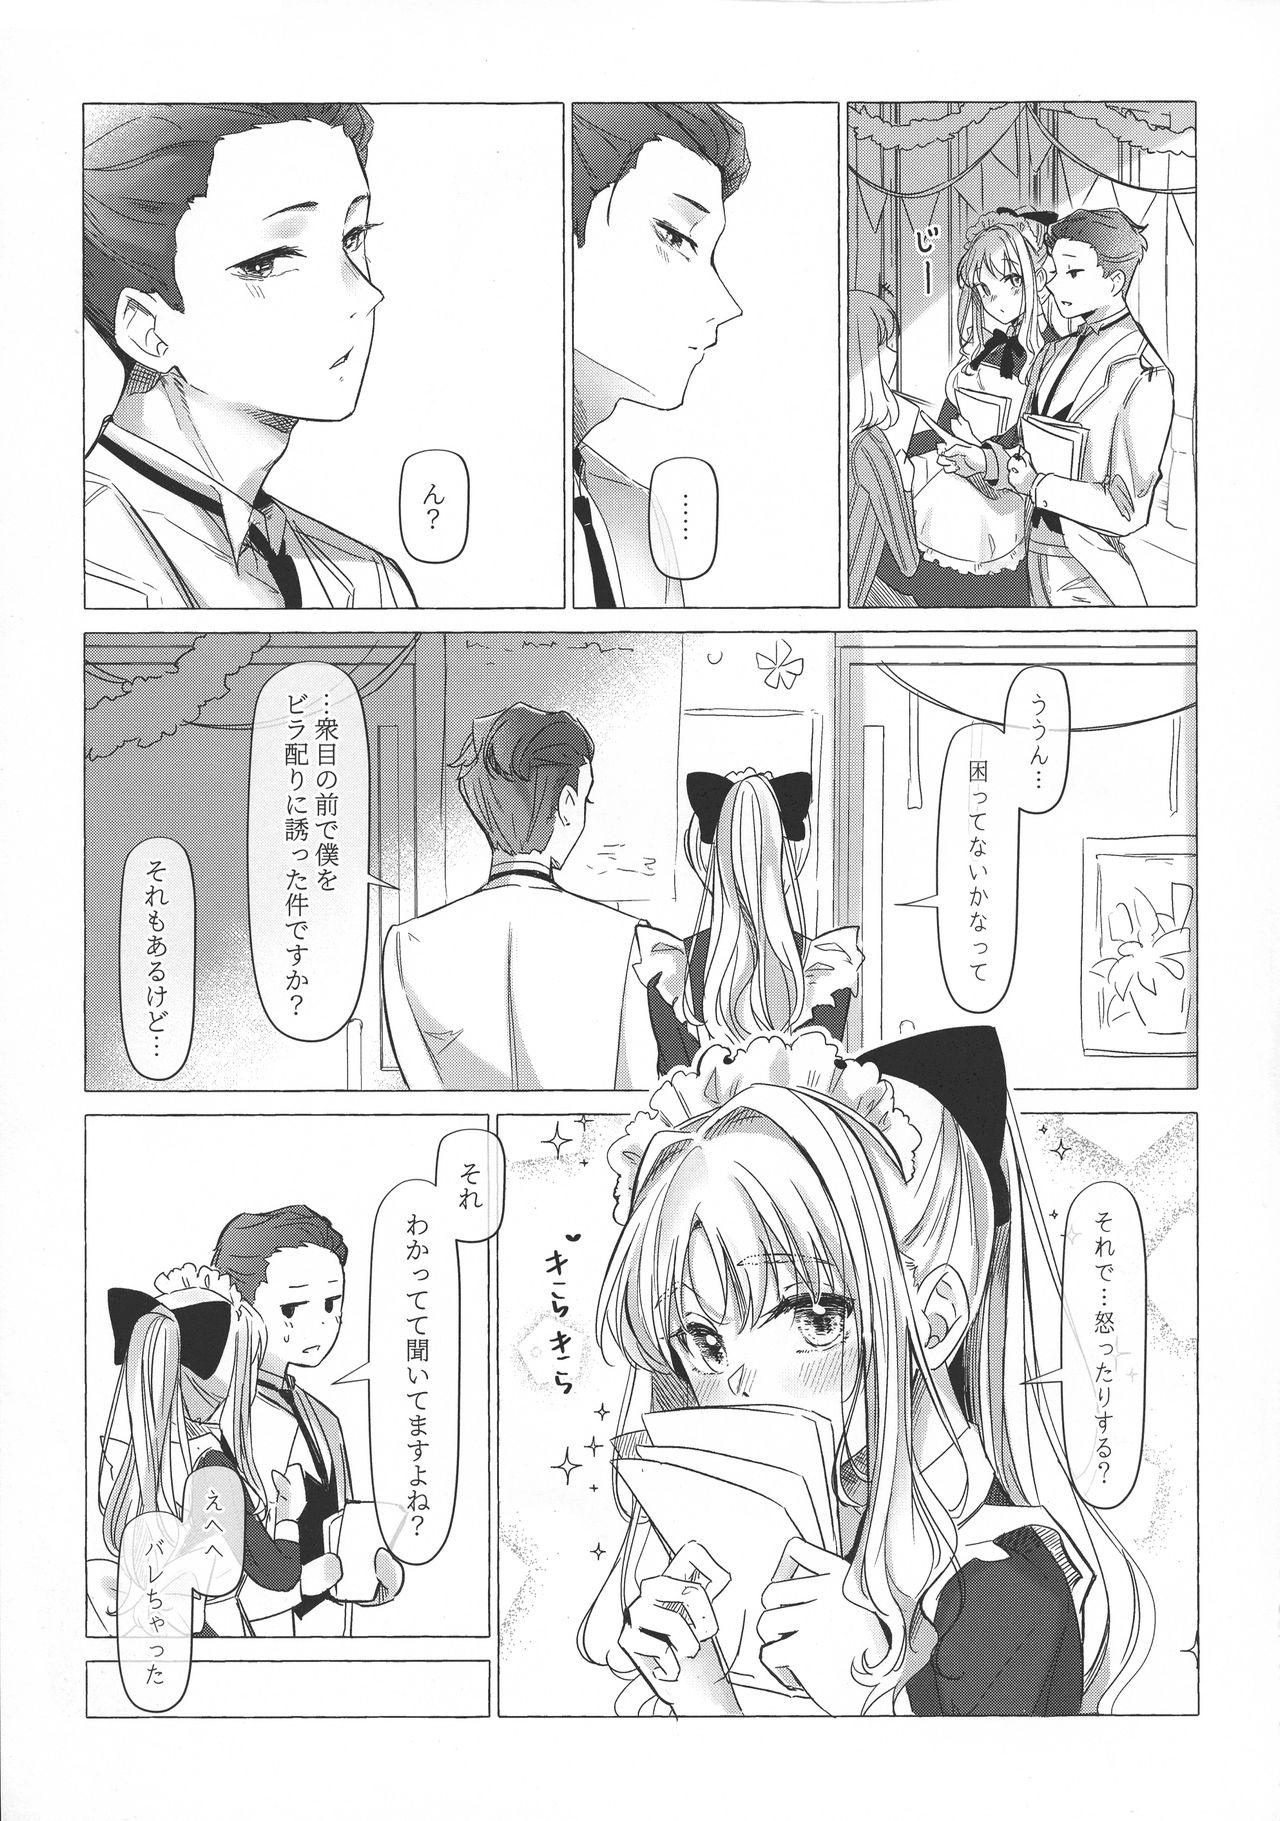 Nipples 満心総意の躾 - Darling in the franxx Throat Fuck - Page 6